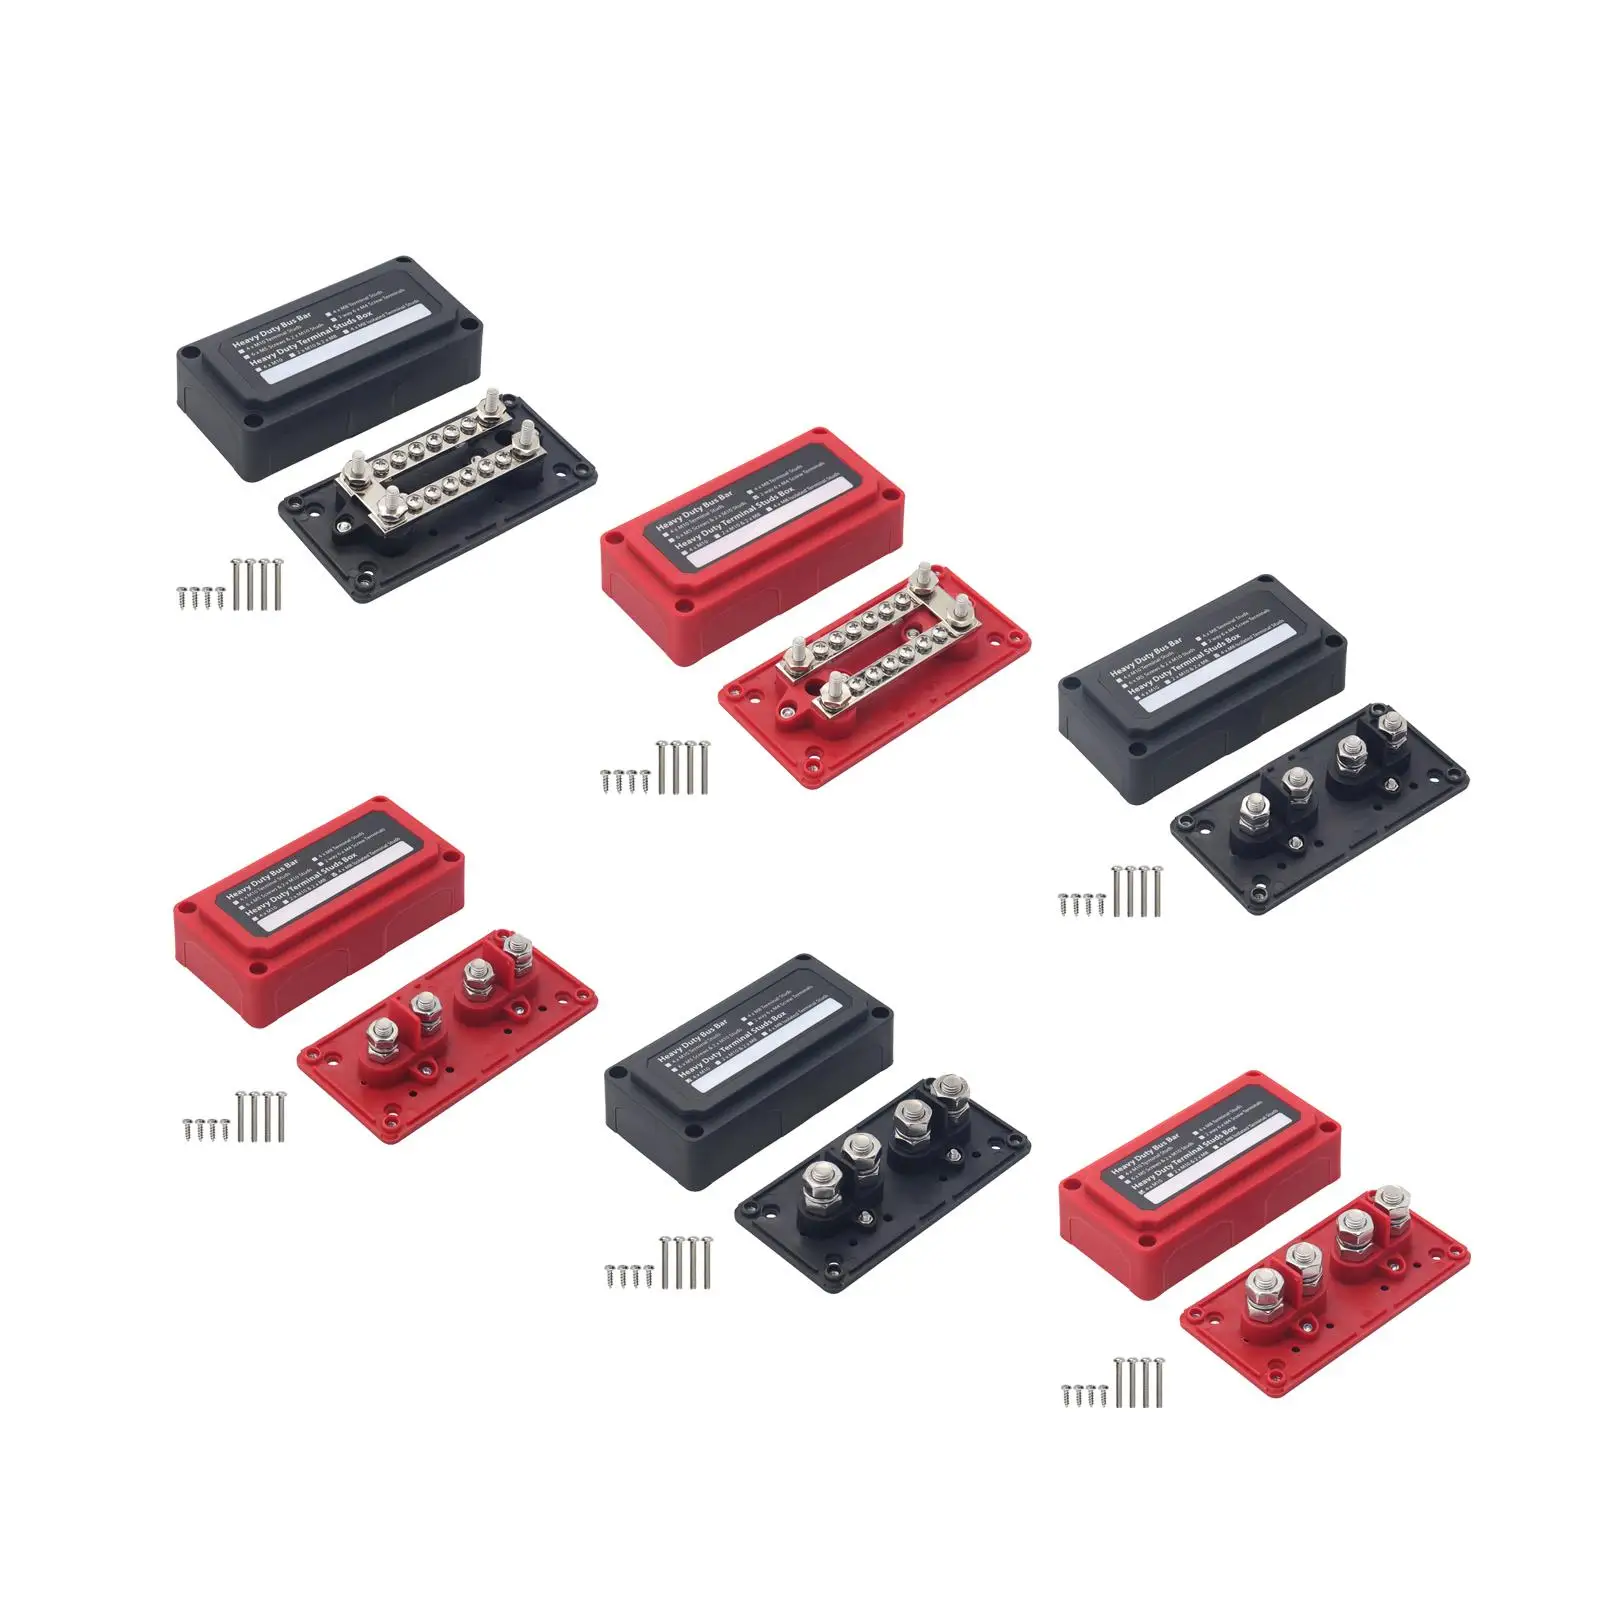 Power Distribution Block Bus Bar with Cover Accessories Replacement Terminal Stud Terminal Block for Automotive RV Boats